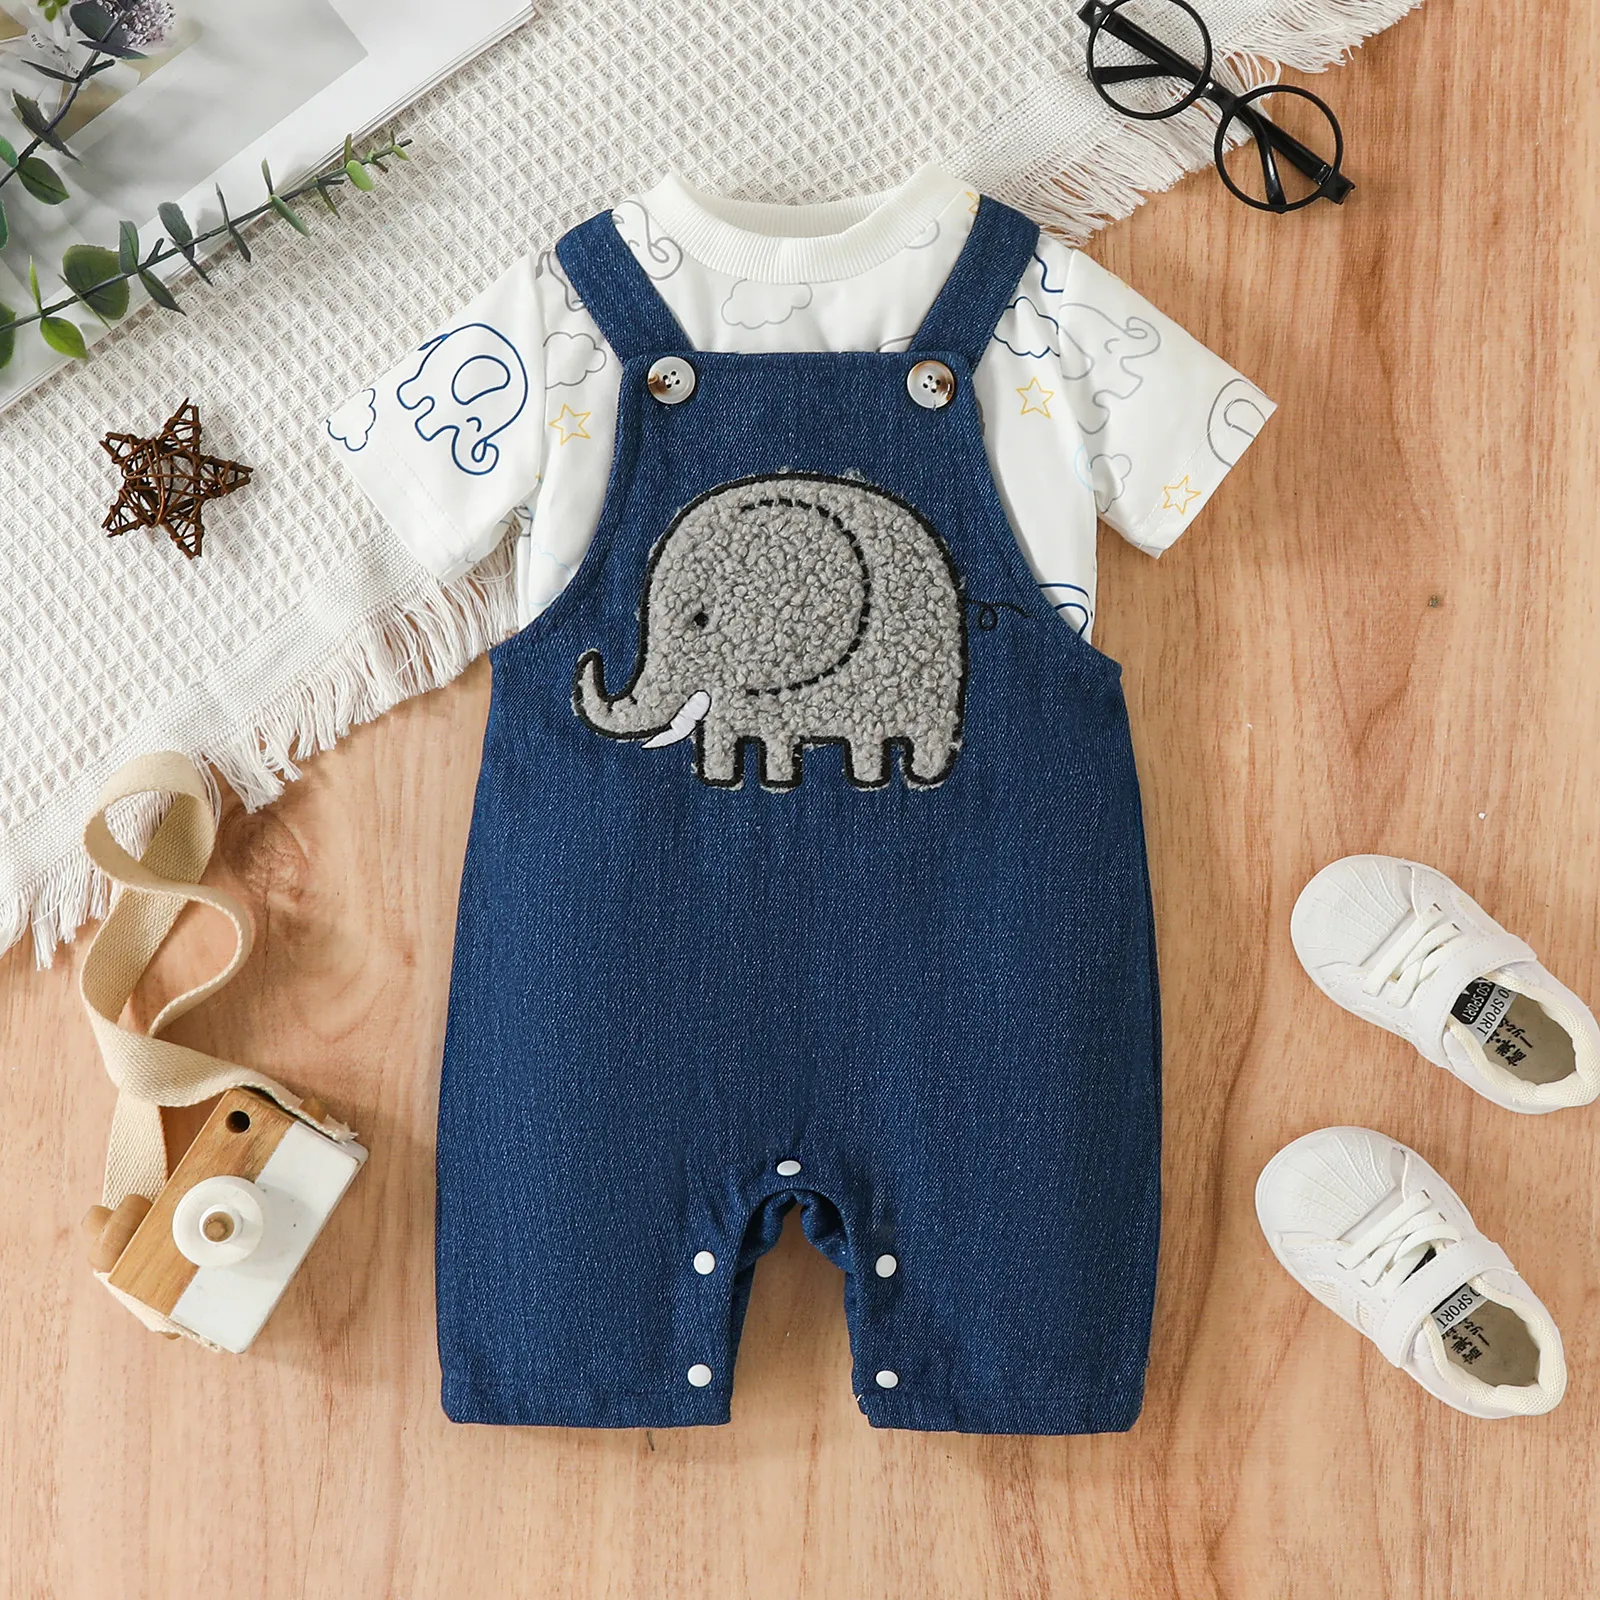 

2pcs Baby Boy Allover Elephants Print Short-sleeve Tee and 100% Cotton Elephant Embroidered Denim Overalls Set